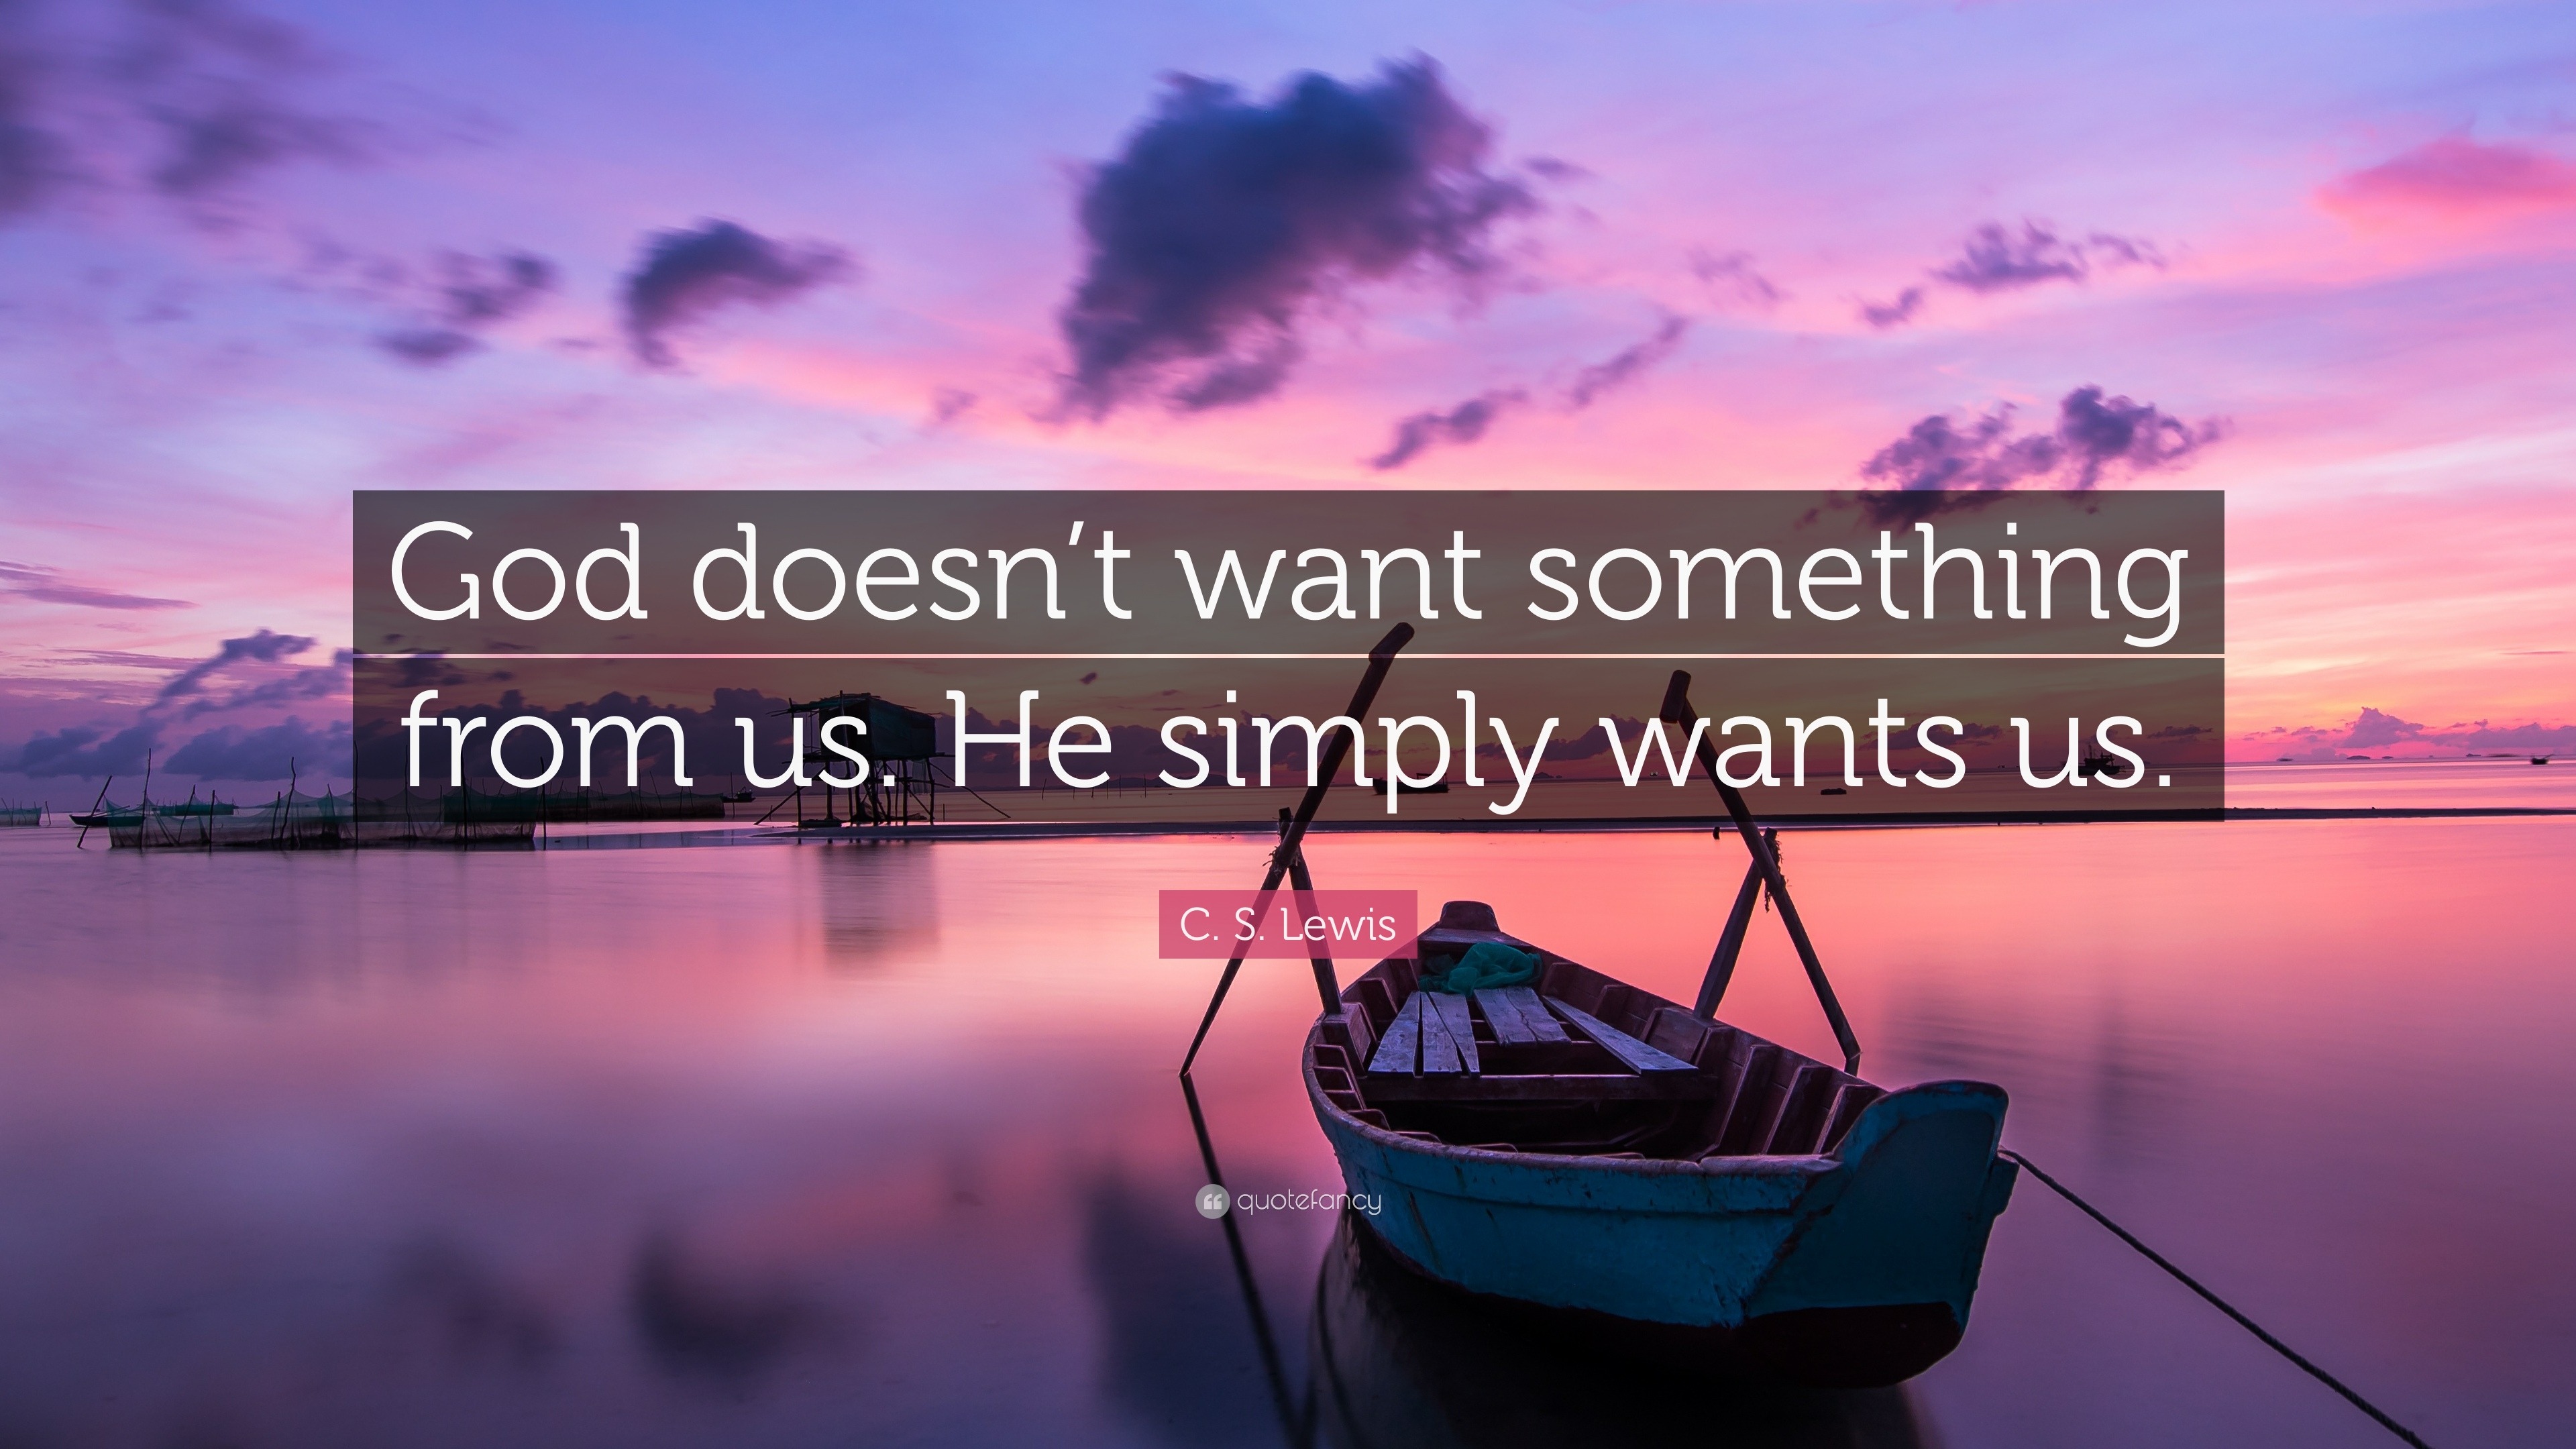 C. S. Lewis Quote: “God doesn’t want something from us. He simply wants